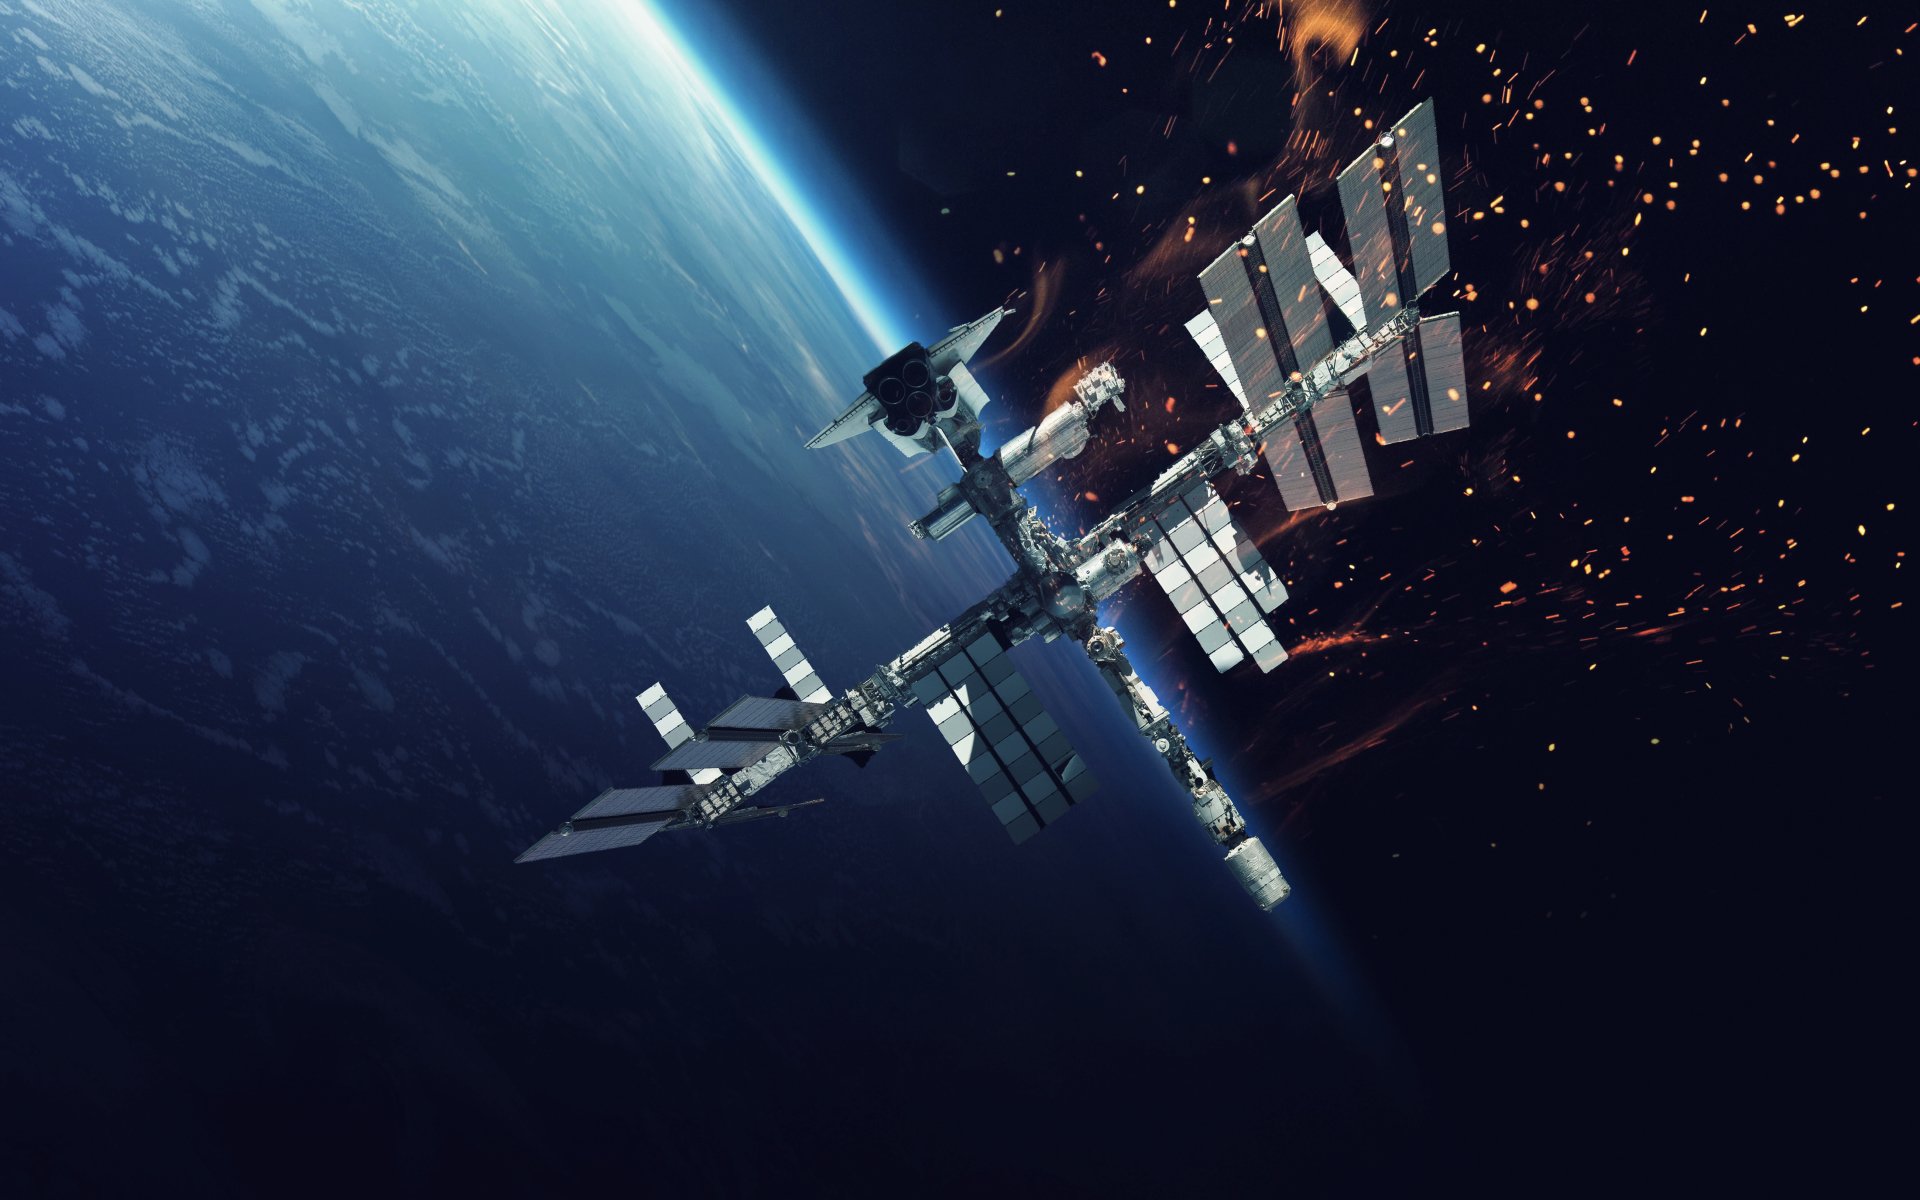 satellite wallpaper,space station,outer space,spacecraft,space,satellite